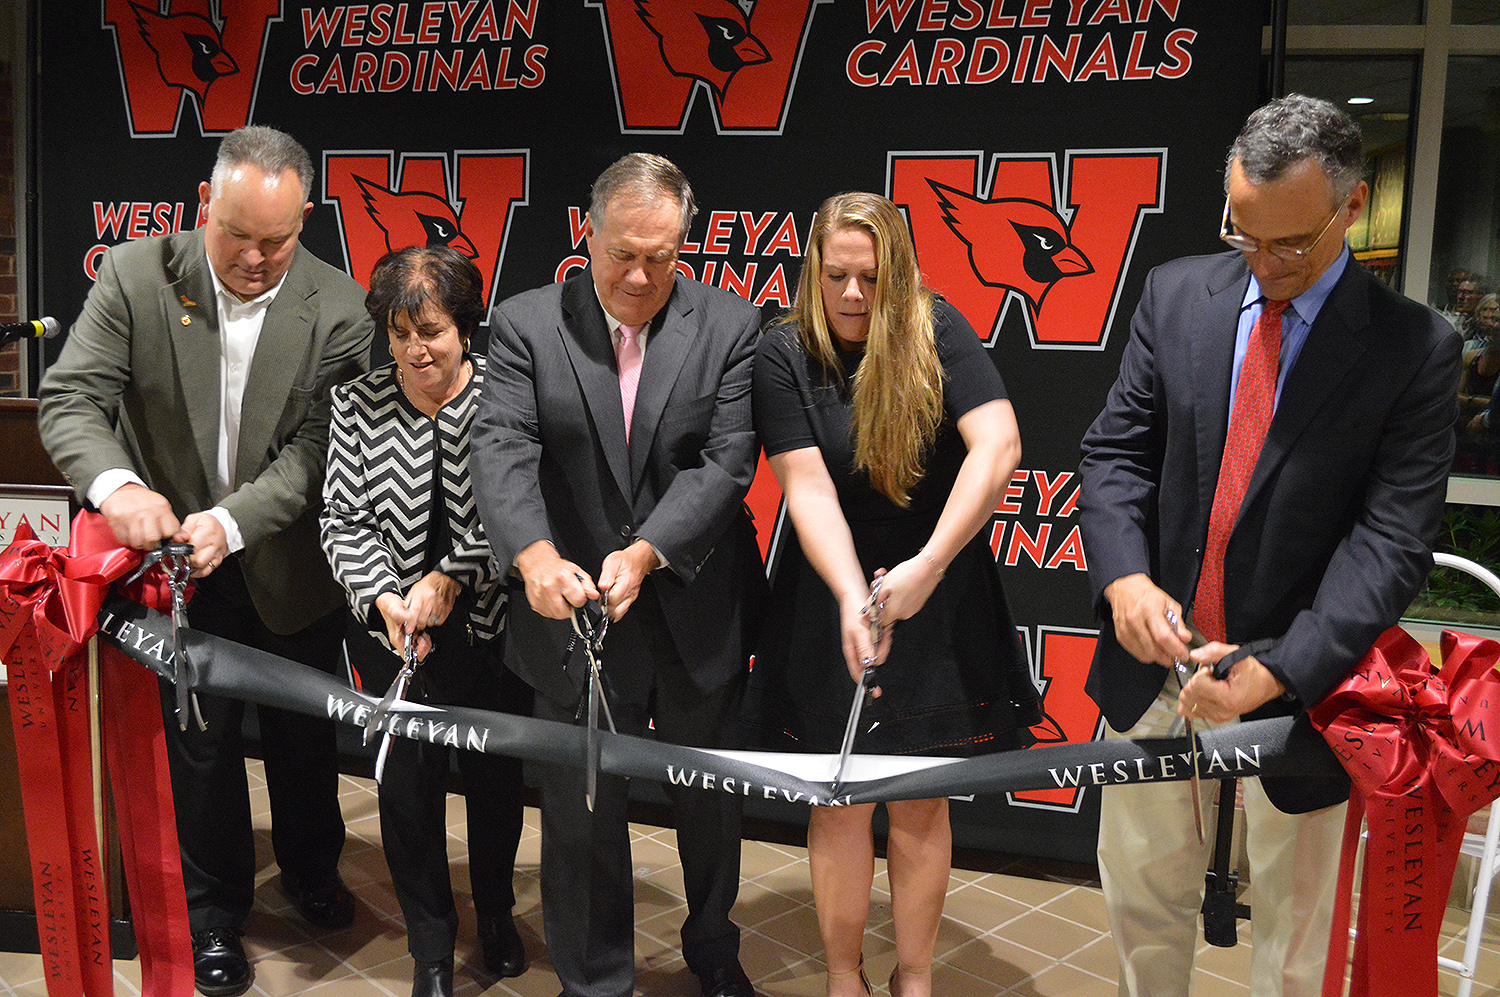 Bill and Amanda Belichick joined Whalen, Morea and Wesleyan President Michael Roth in a ribbon cutting ceremony to officially acknowledge the inside the newly-named Belichick Plaza